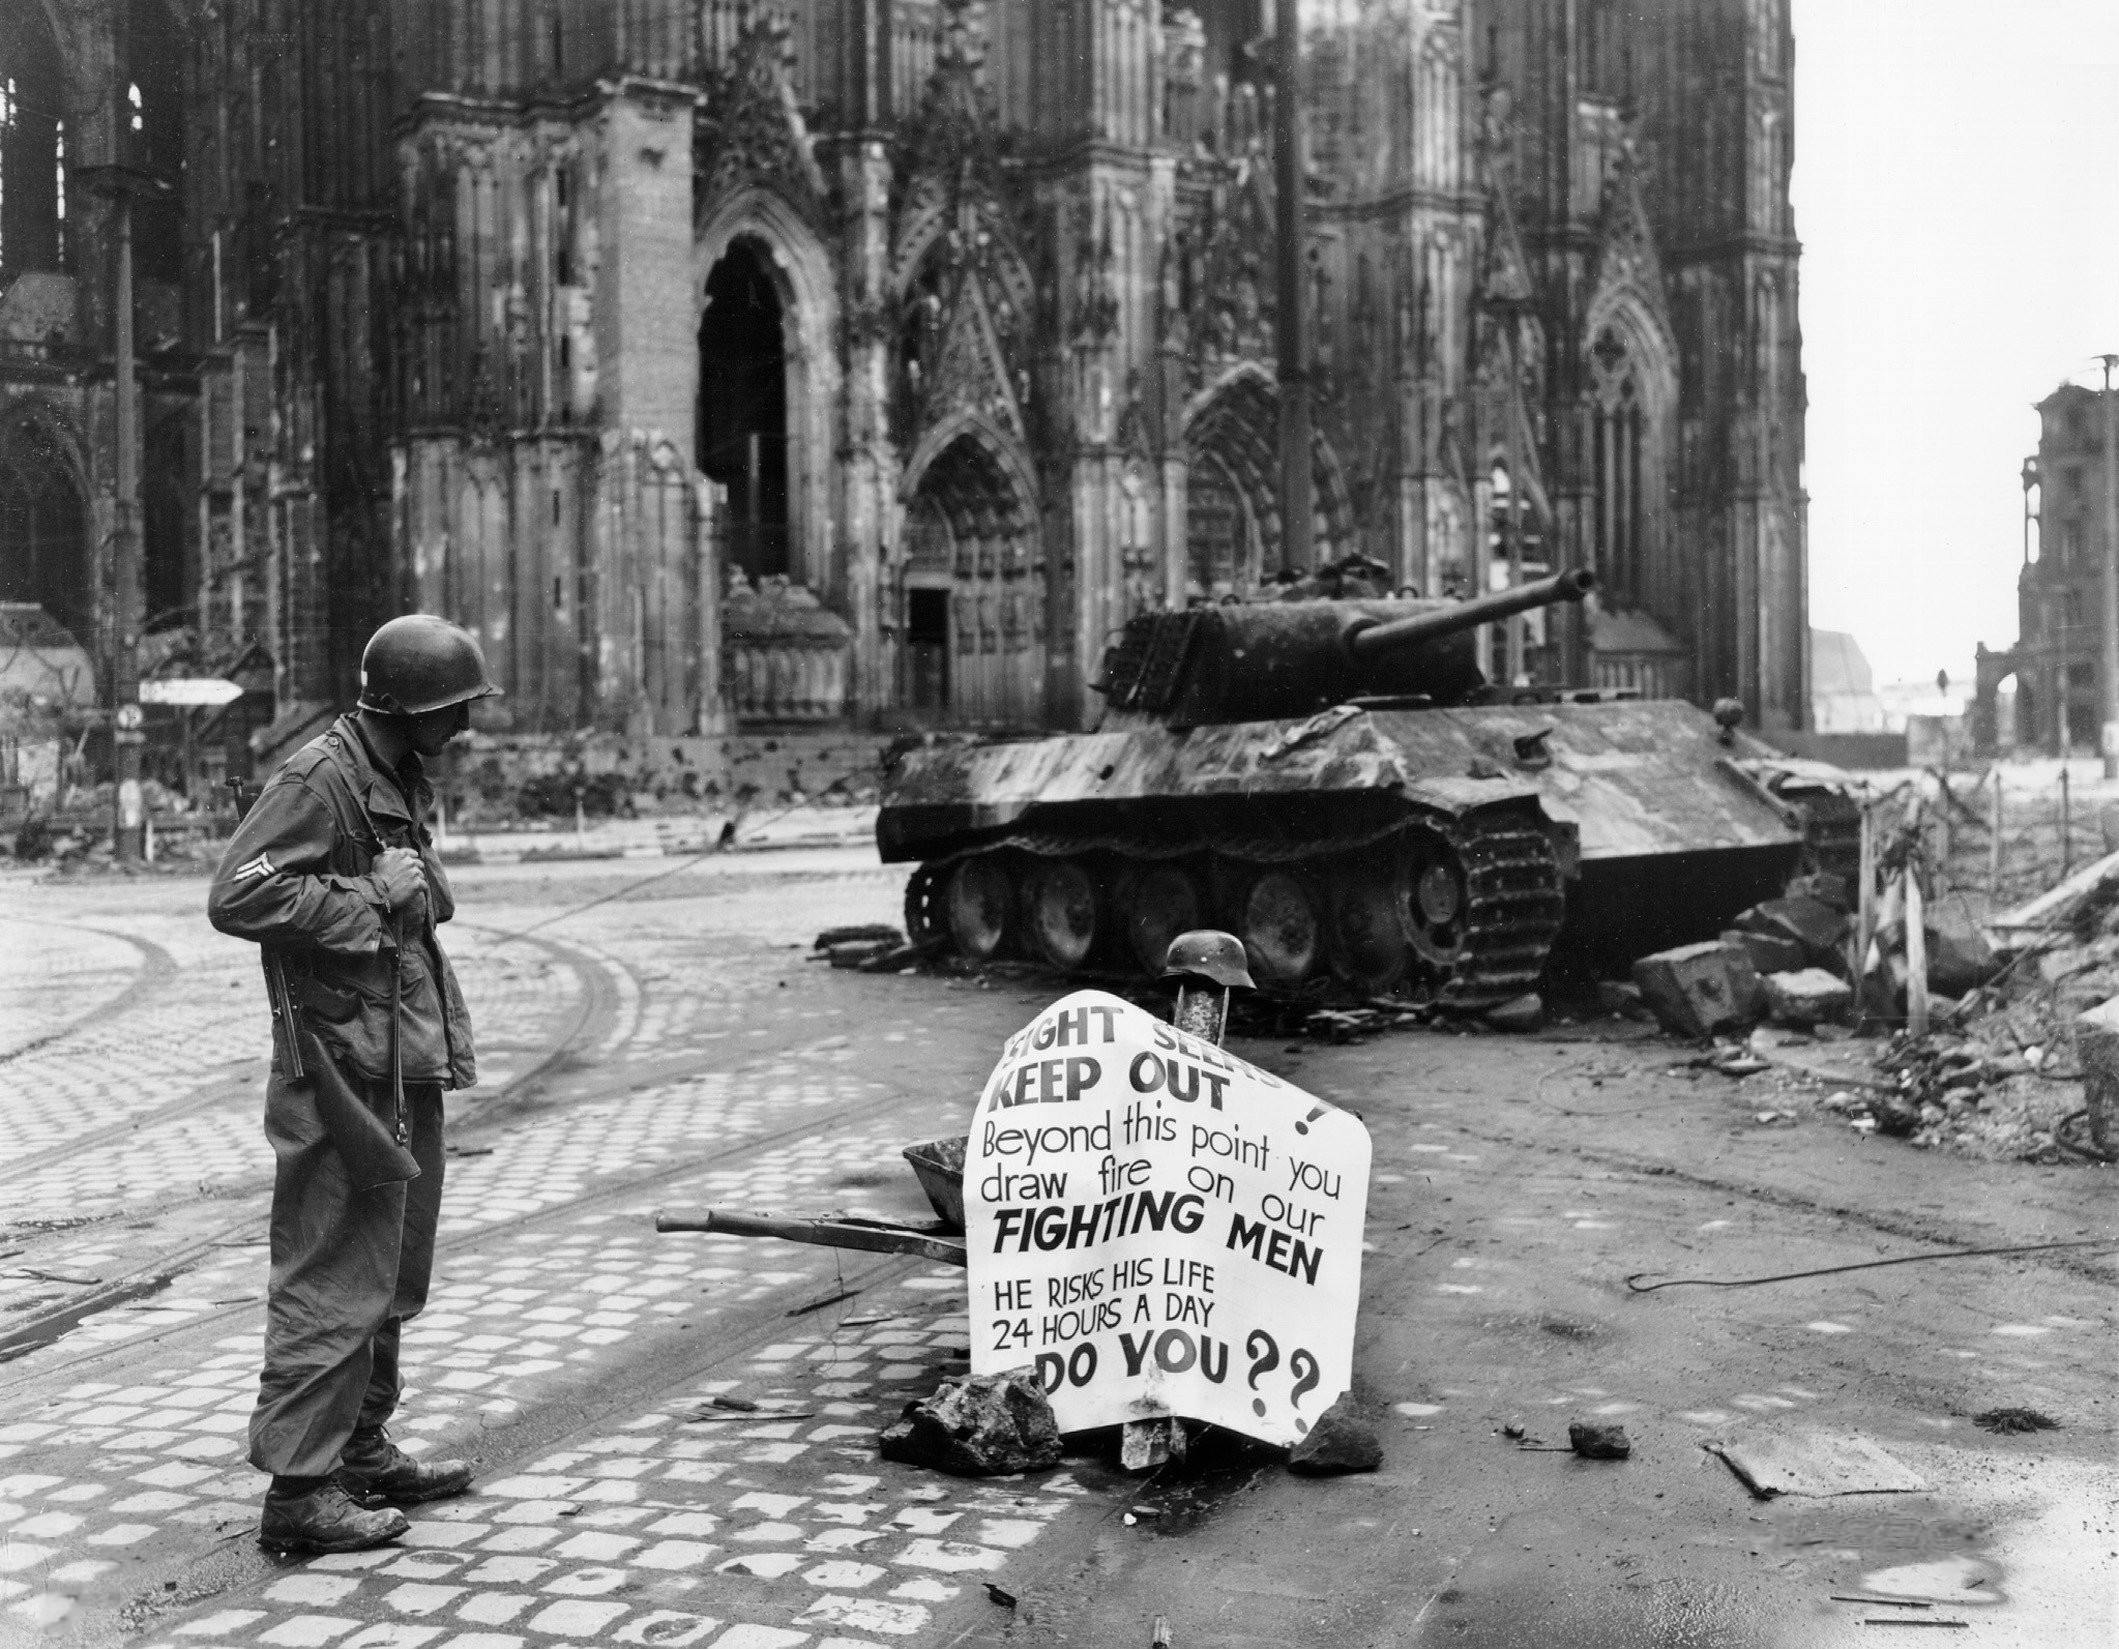 A &#8220;mindful&#8221; journey through the ruins of WWII in Cologne